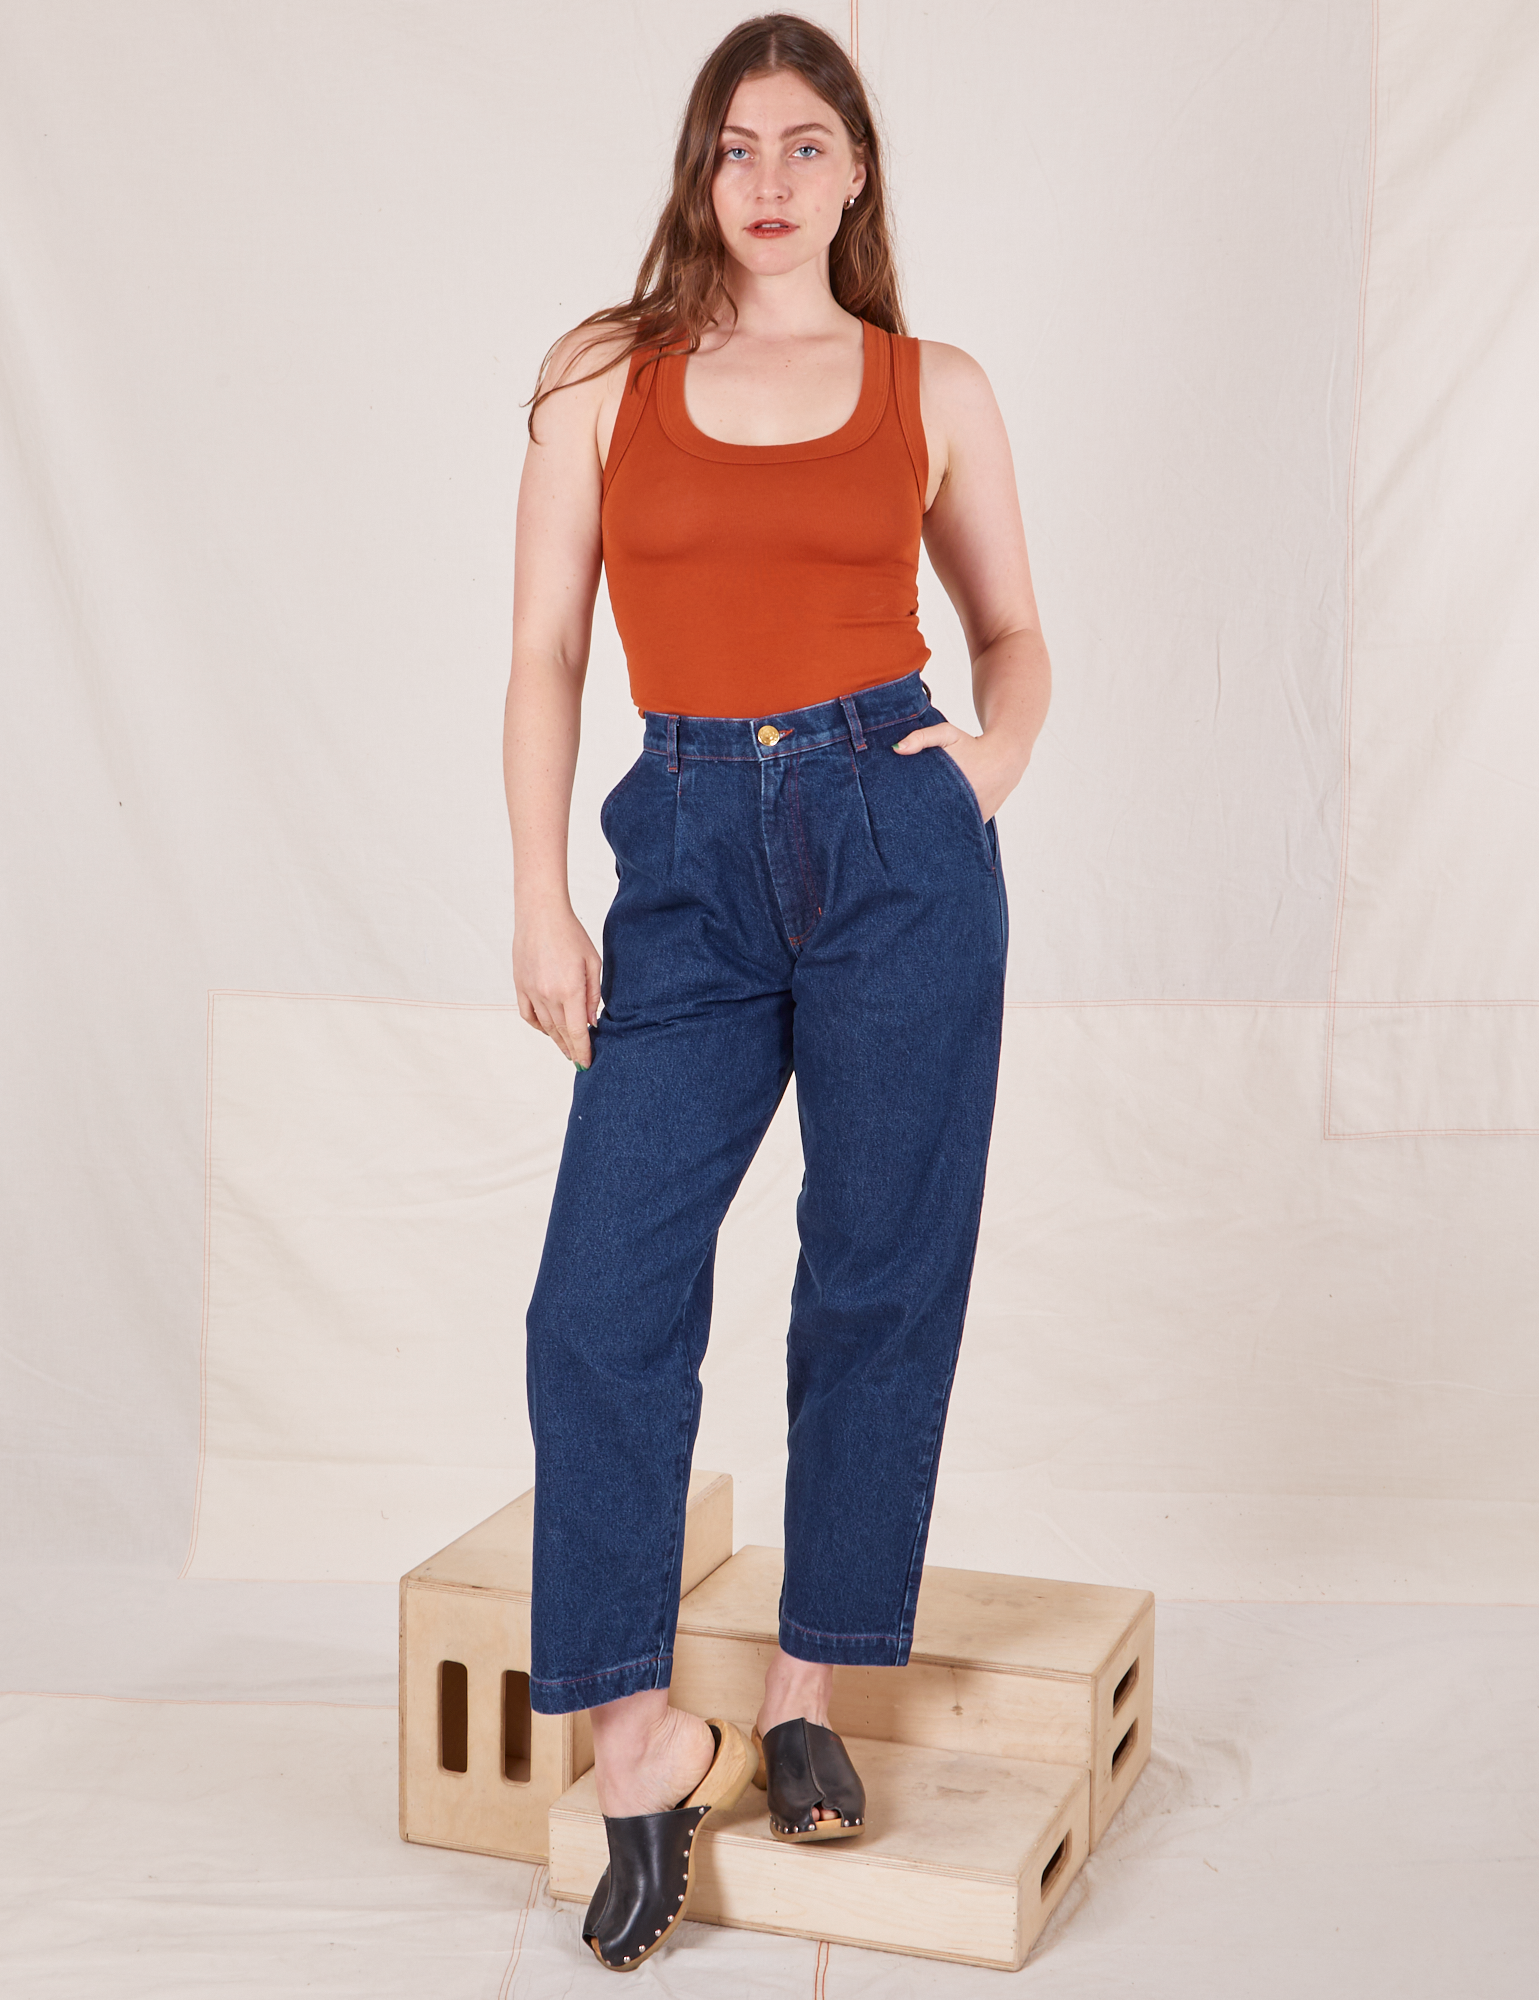 Allison is 5&#39;10&quot; and wearing XS Denim Trouser Jeans in Dark Wash paired with burnt orange Tank Top